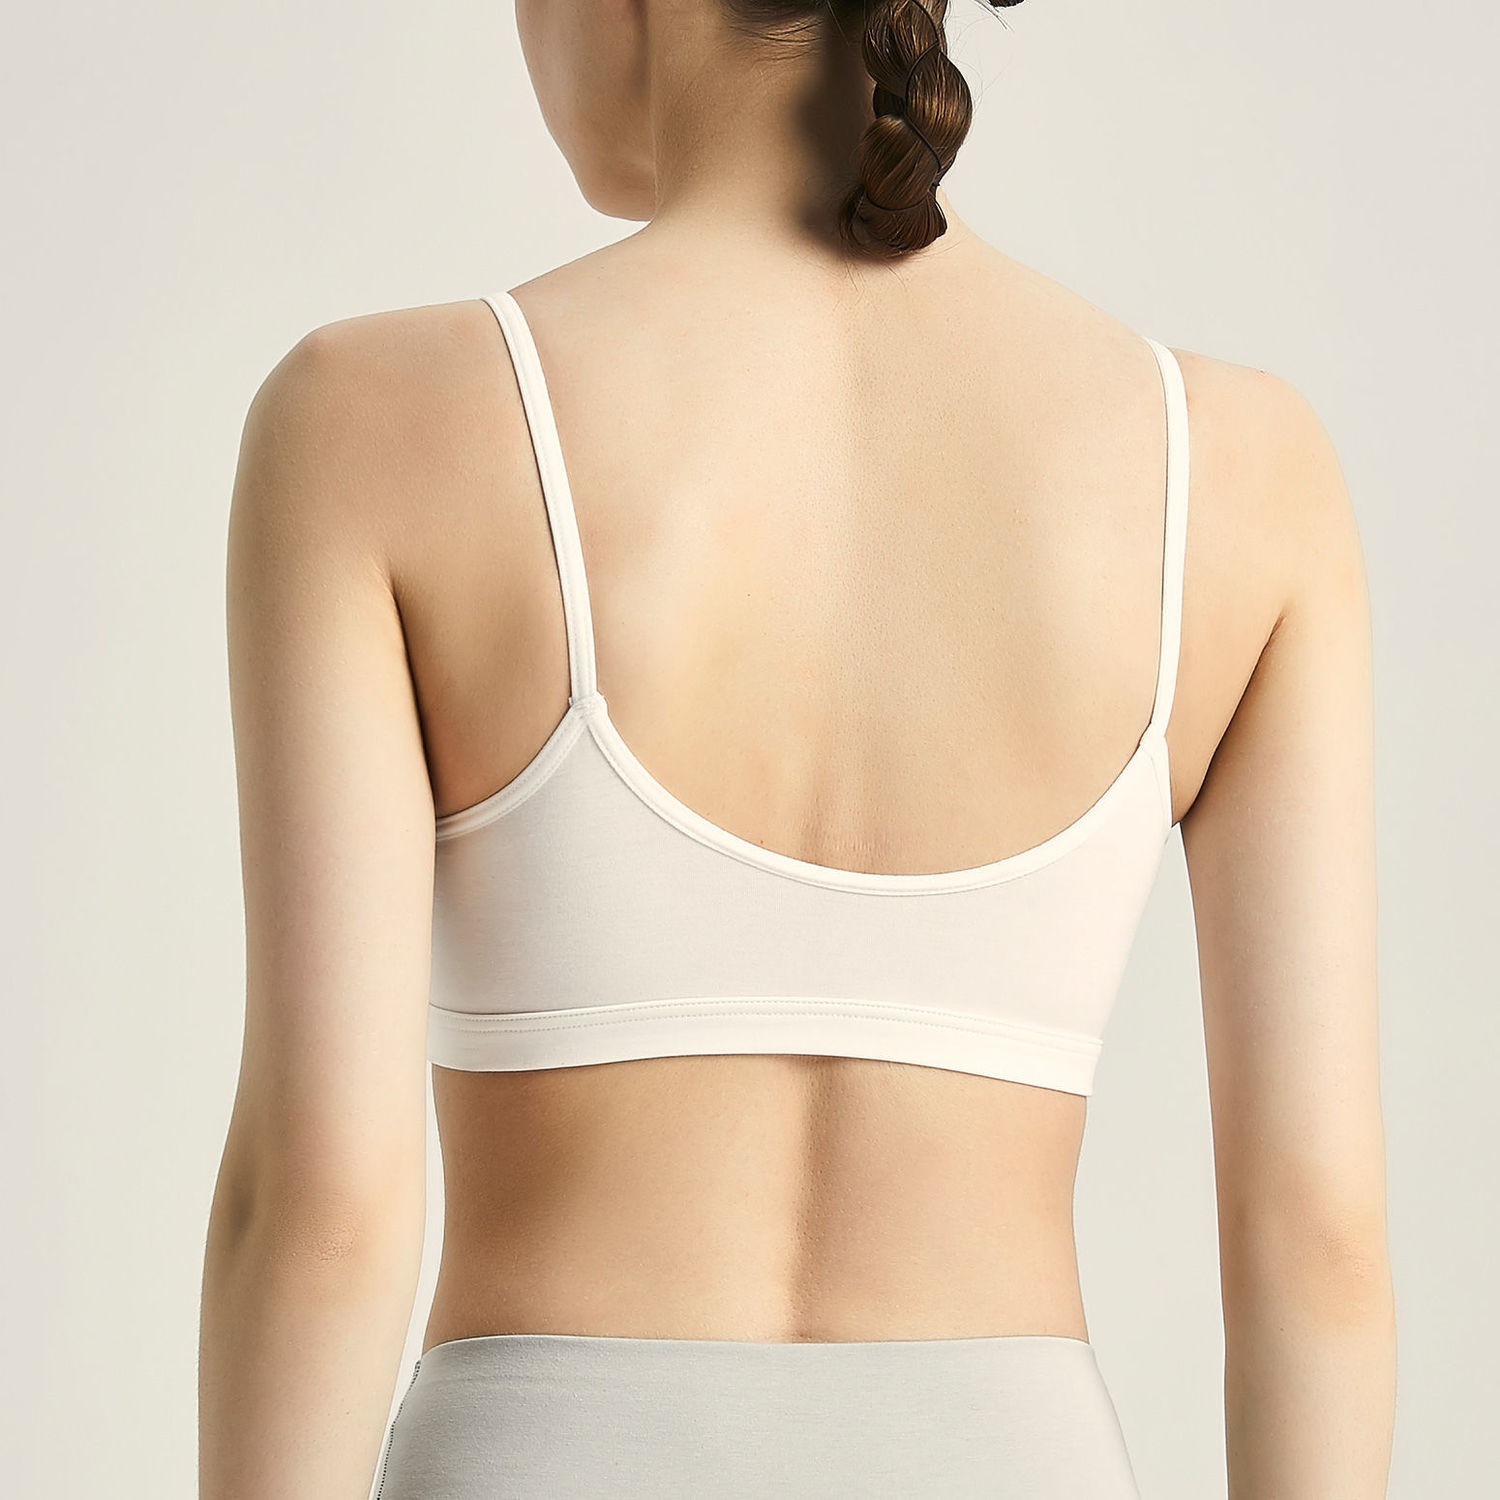 Beautiful back bra integrated chest tube top with straps bottoming vest women's outer wear trend gather seamless underwear women